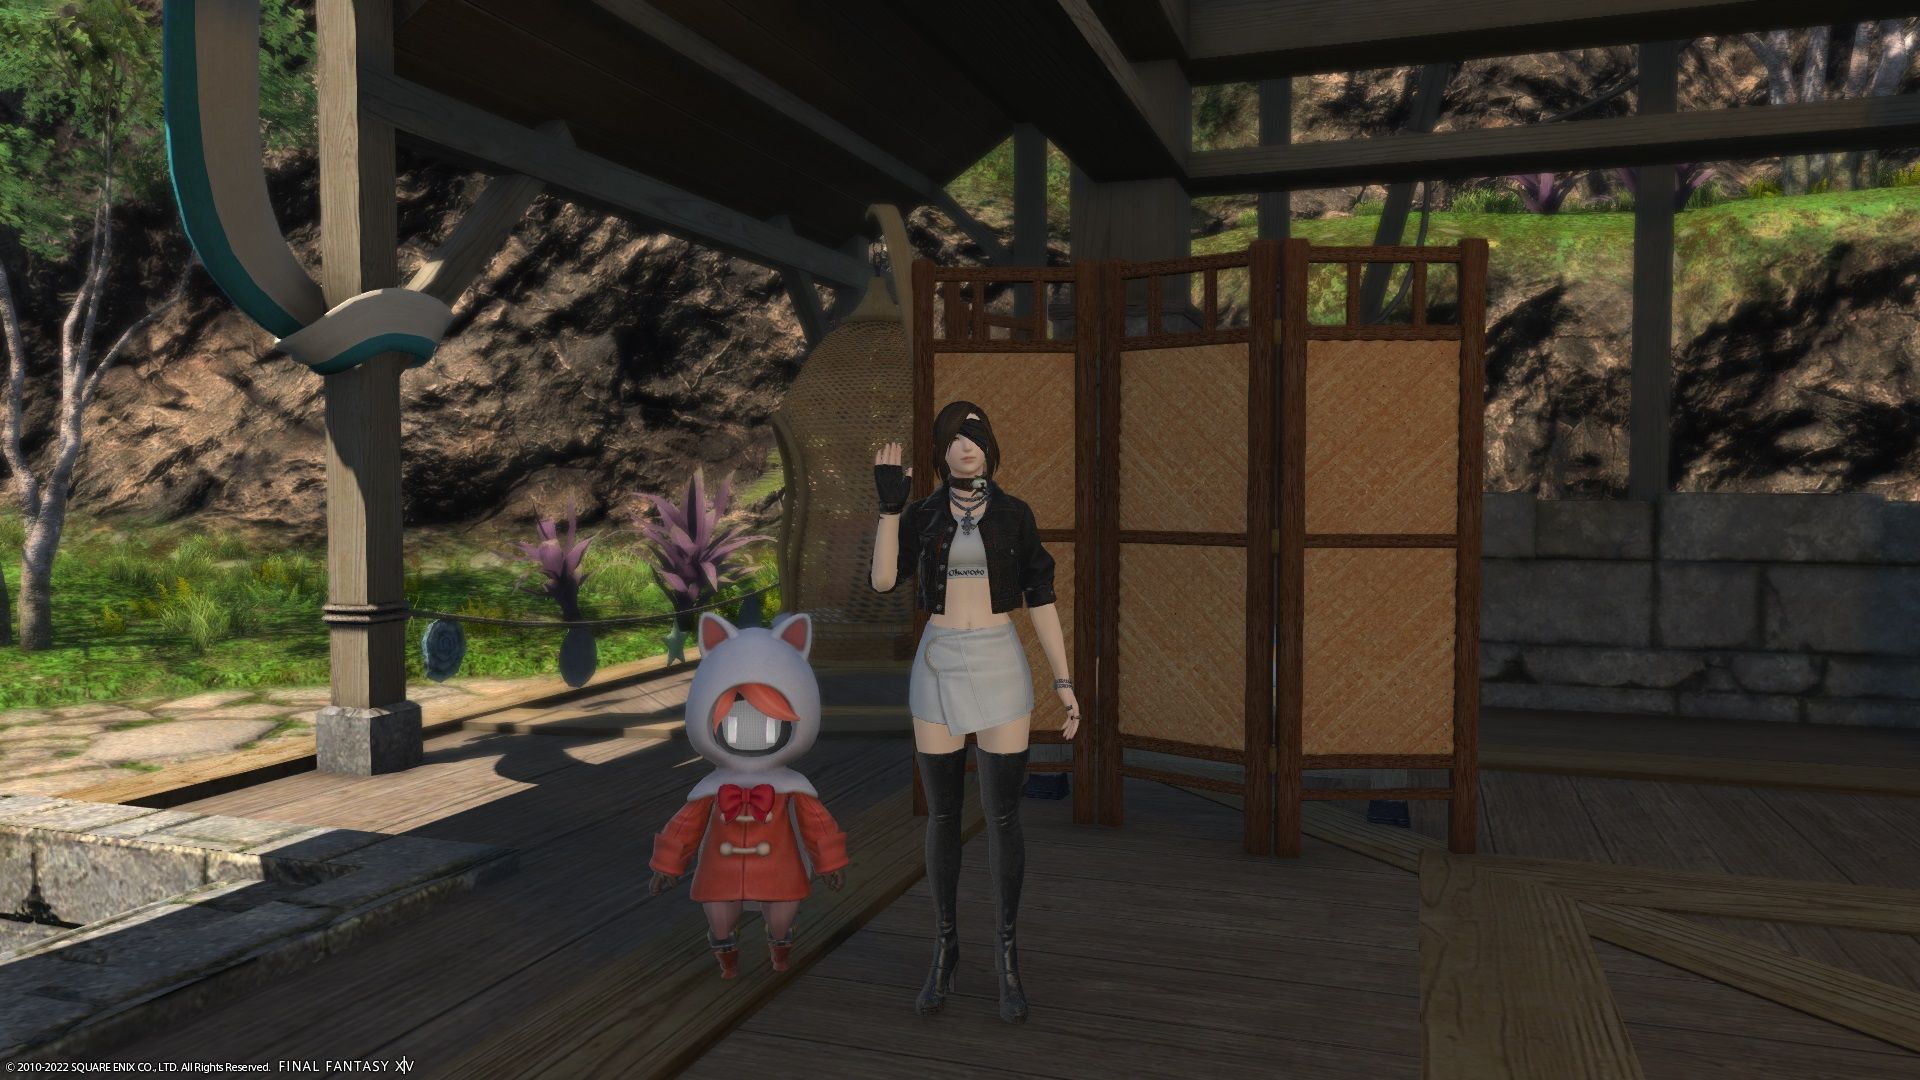 Final Fantasy 14 player with Felicitous Furball in the Island Sanctuary